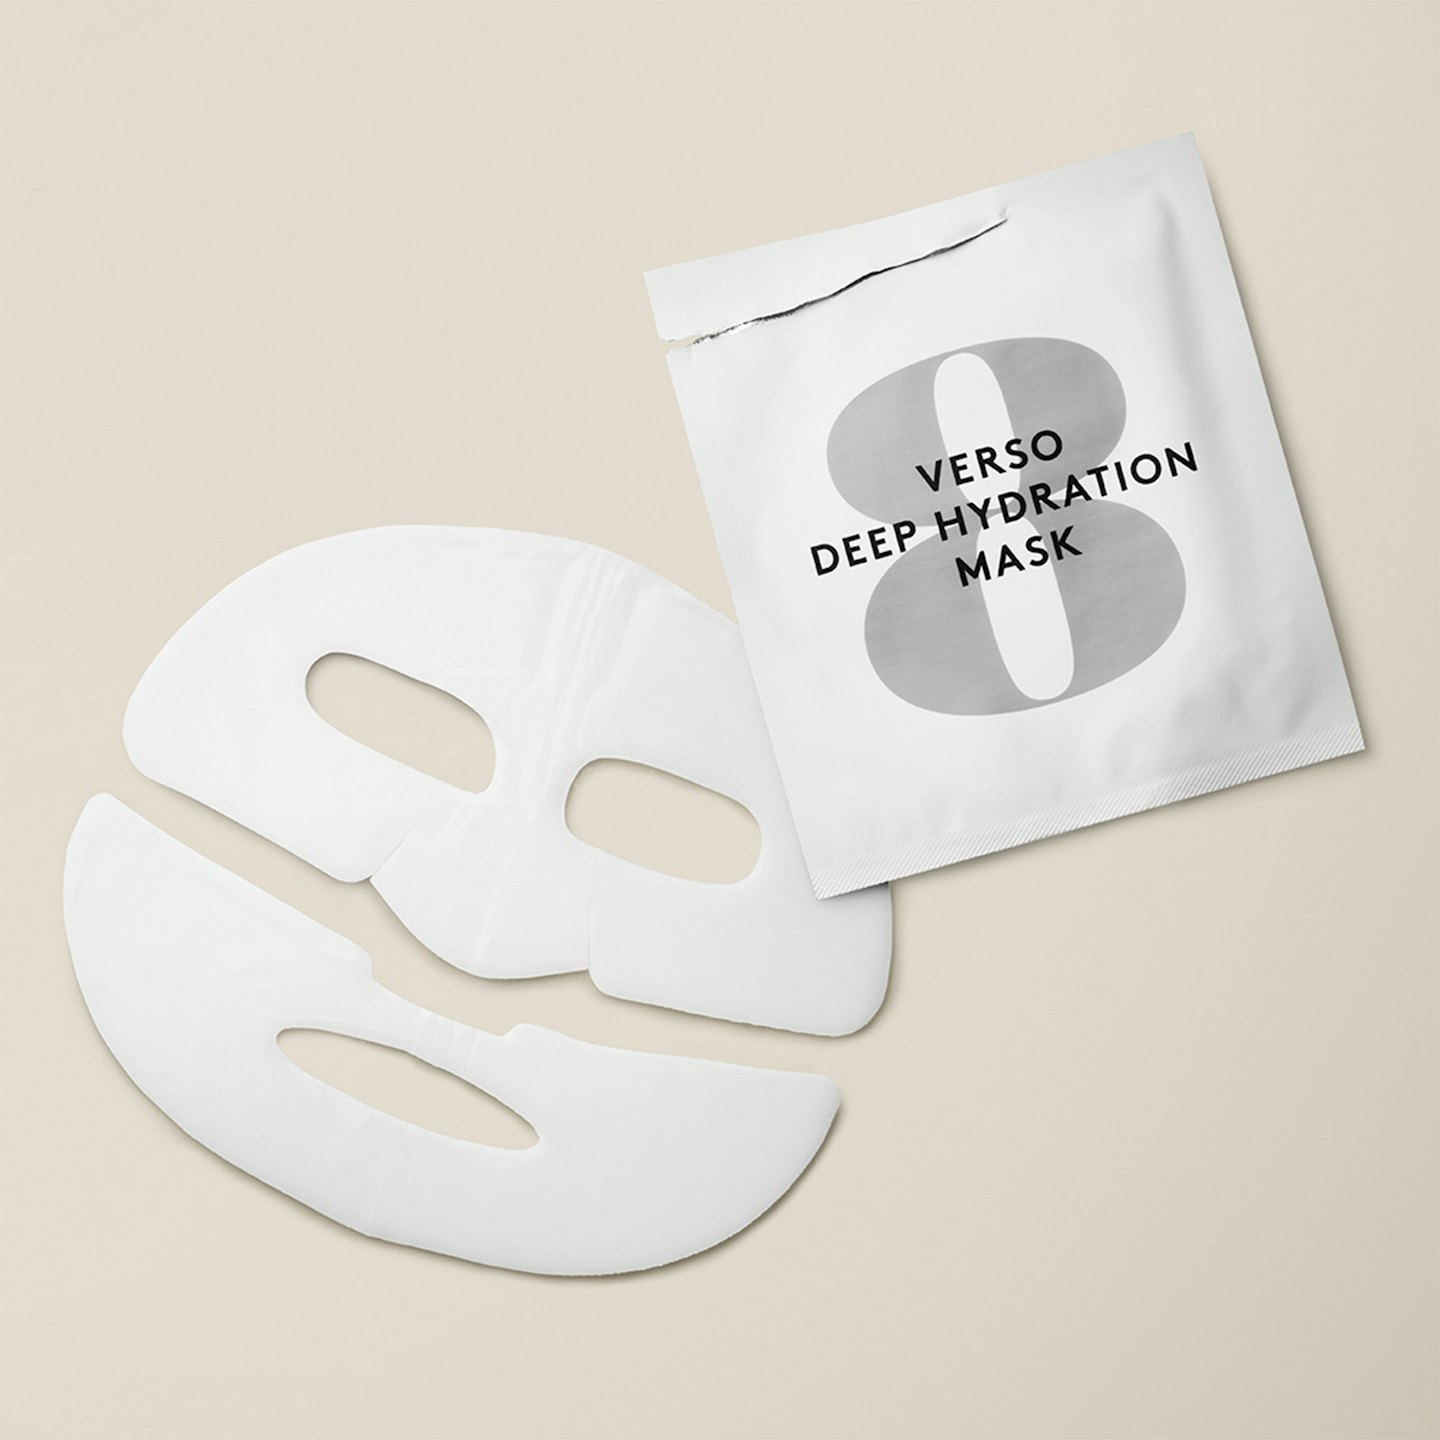 Verso Deep Hydration Mask 4 pack